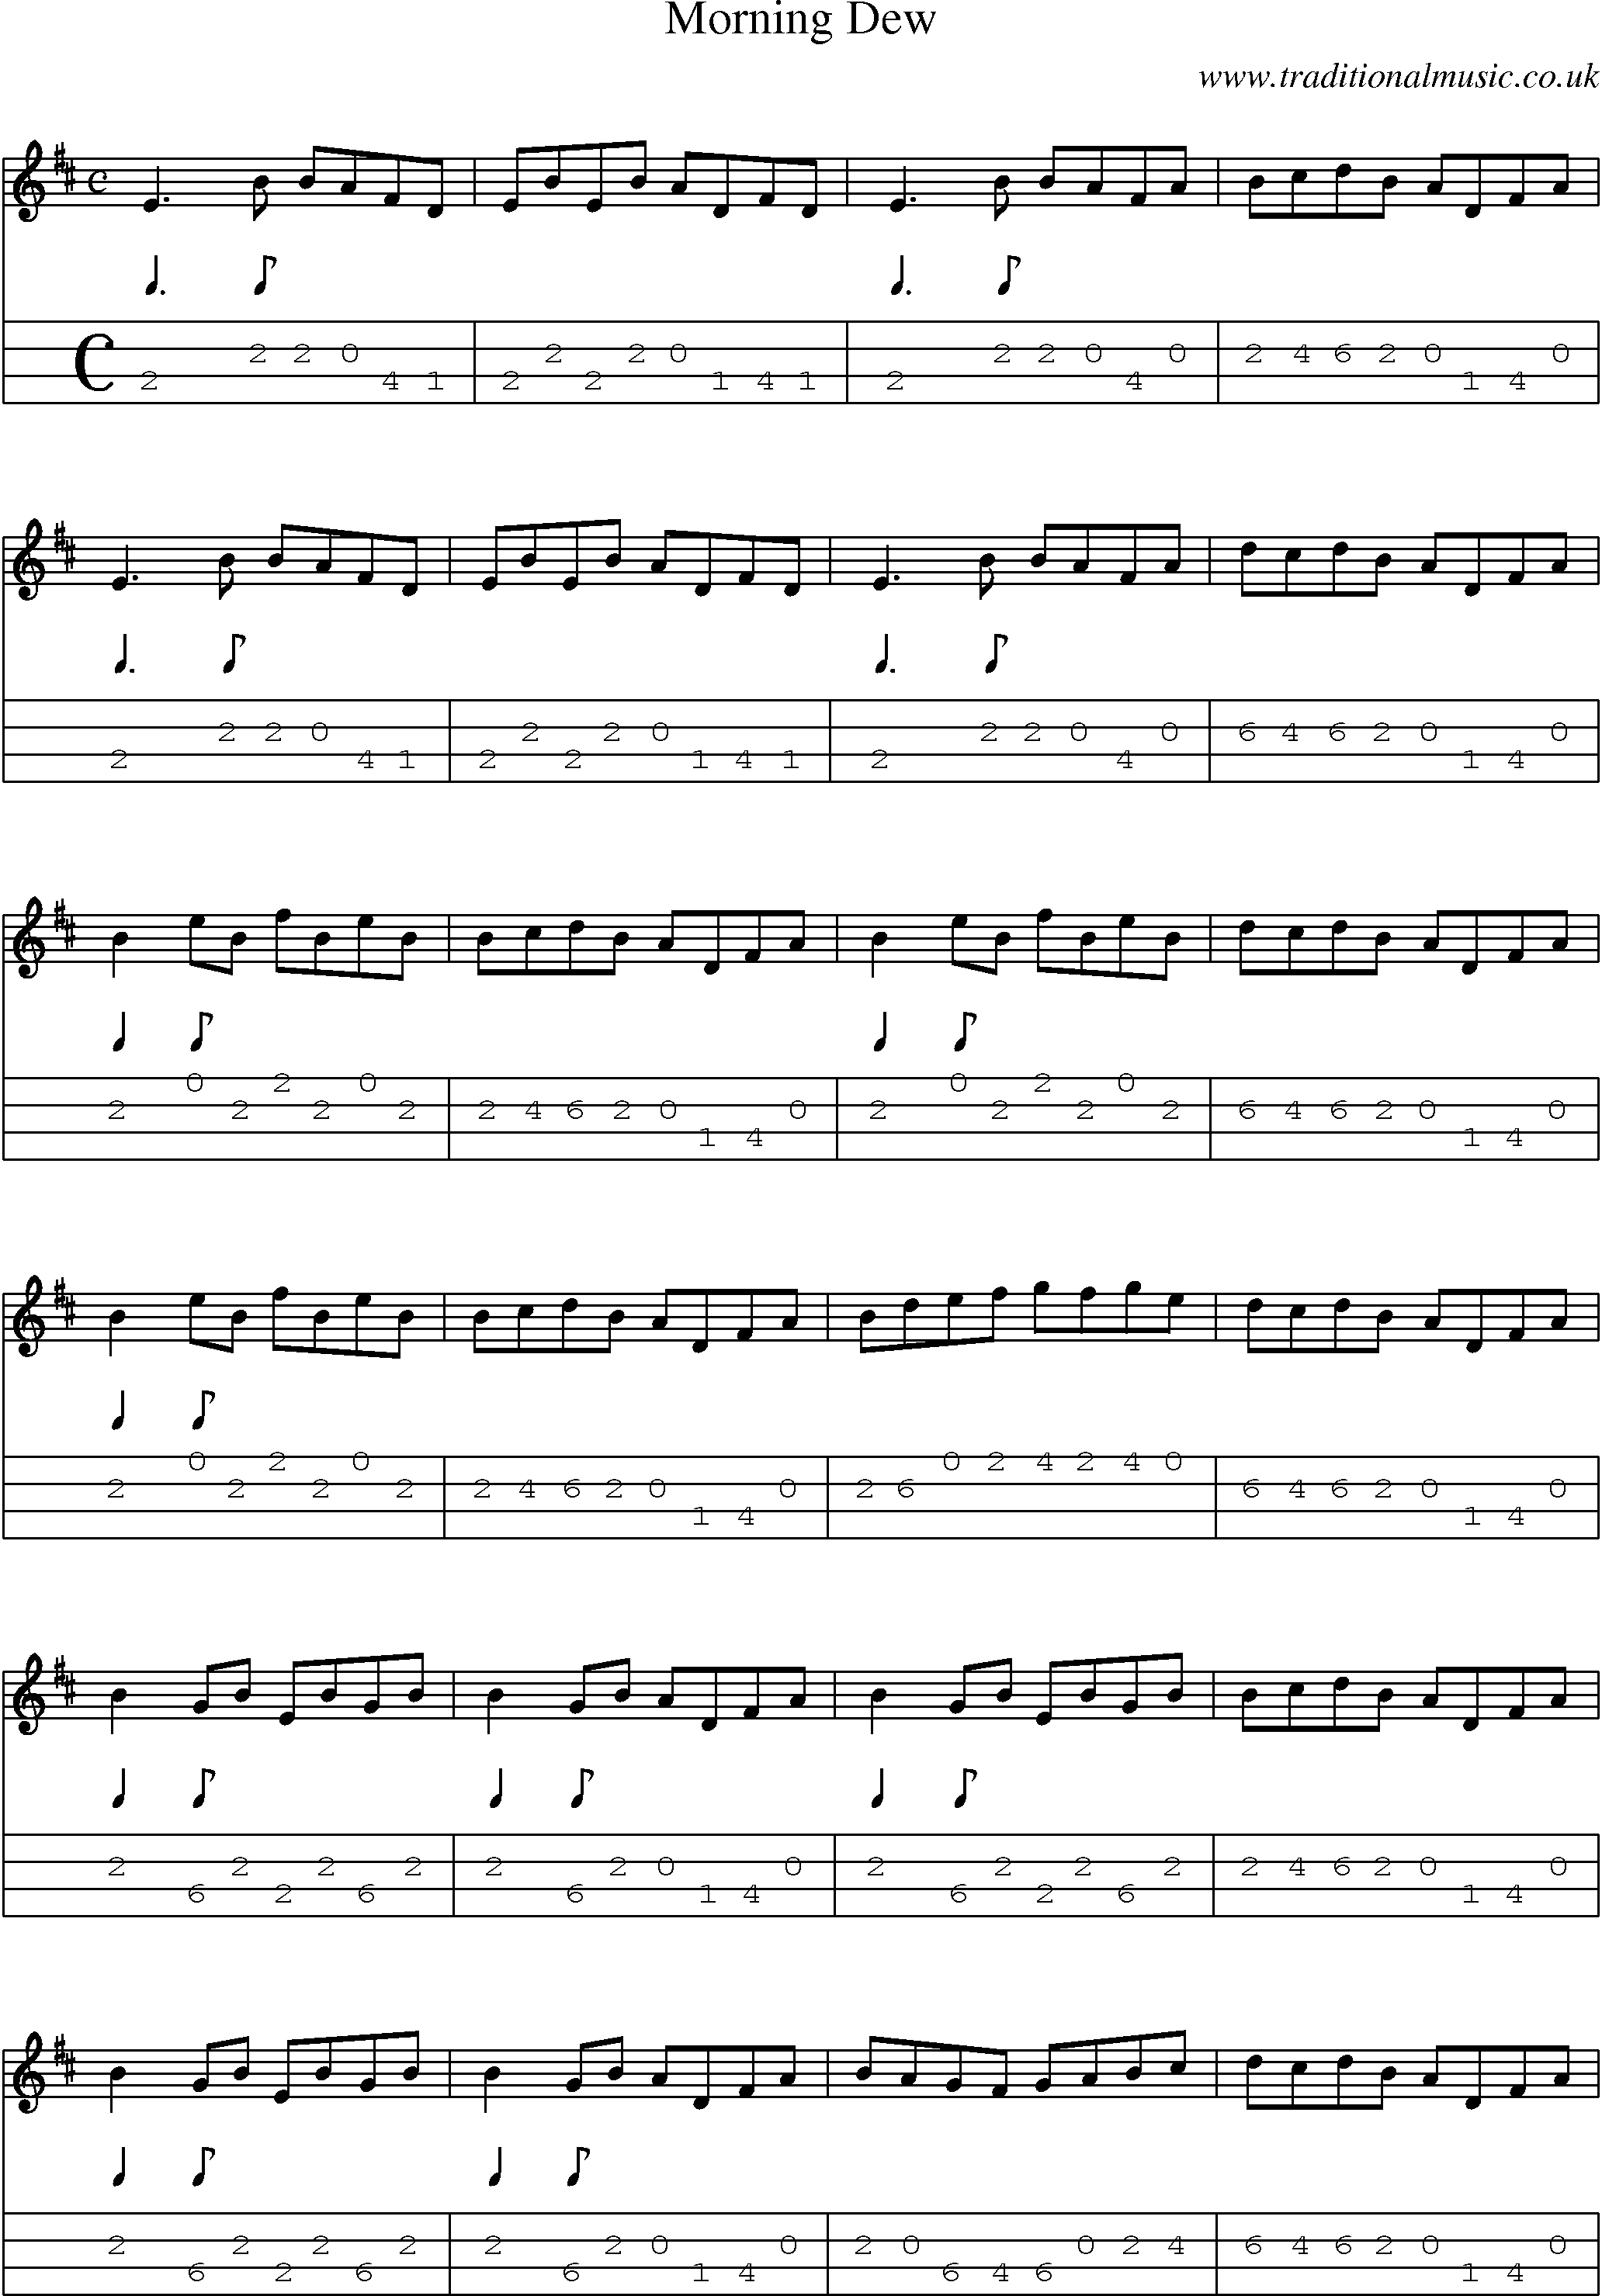 Music Score and Mandolin Tabs for Morning Dew